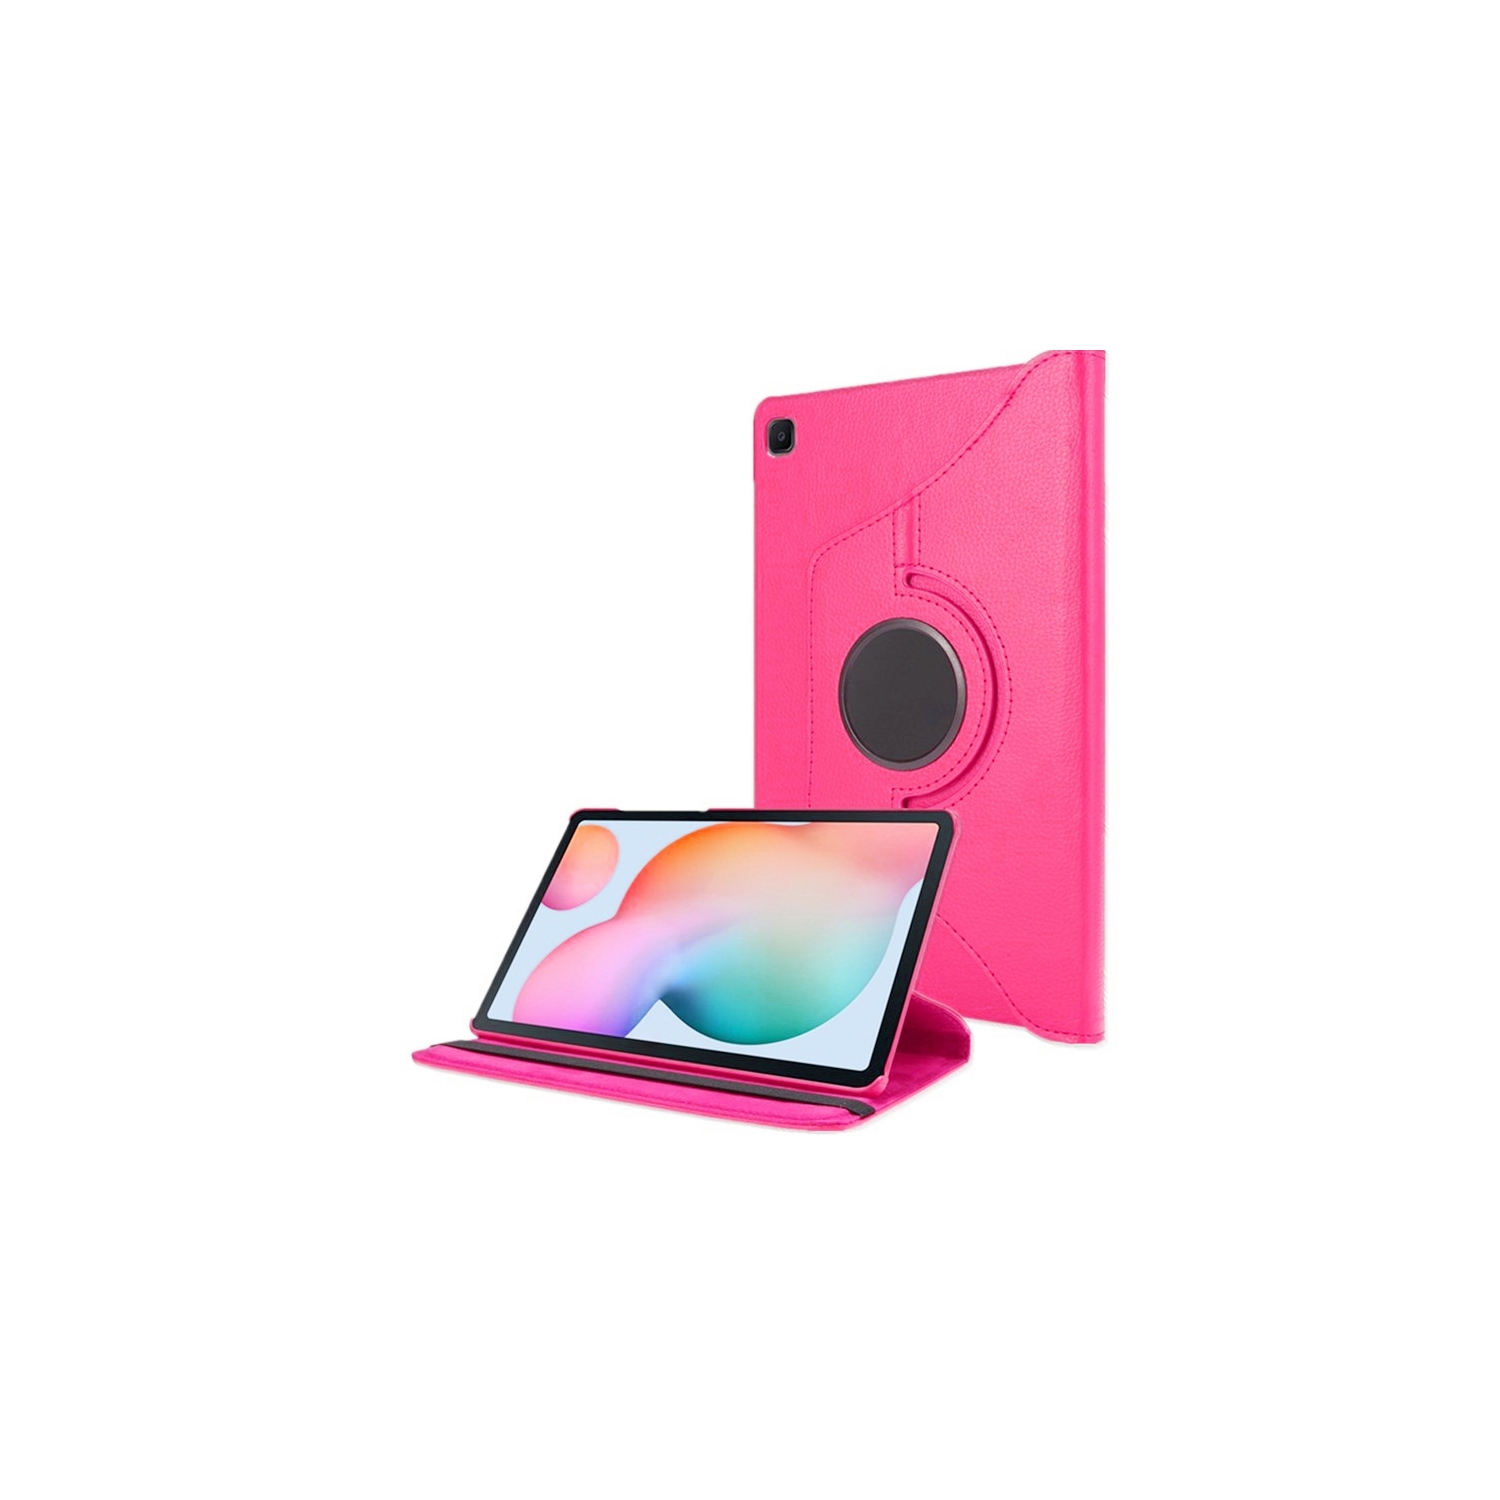 【CSmart】 360 Rotating PU Leather Stand Case Smart Cover for Samsung Galaxy Tab S6 Lite, P610 P615, Hot Pink